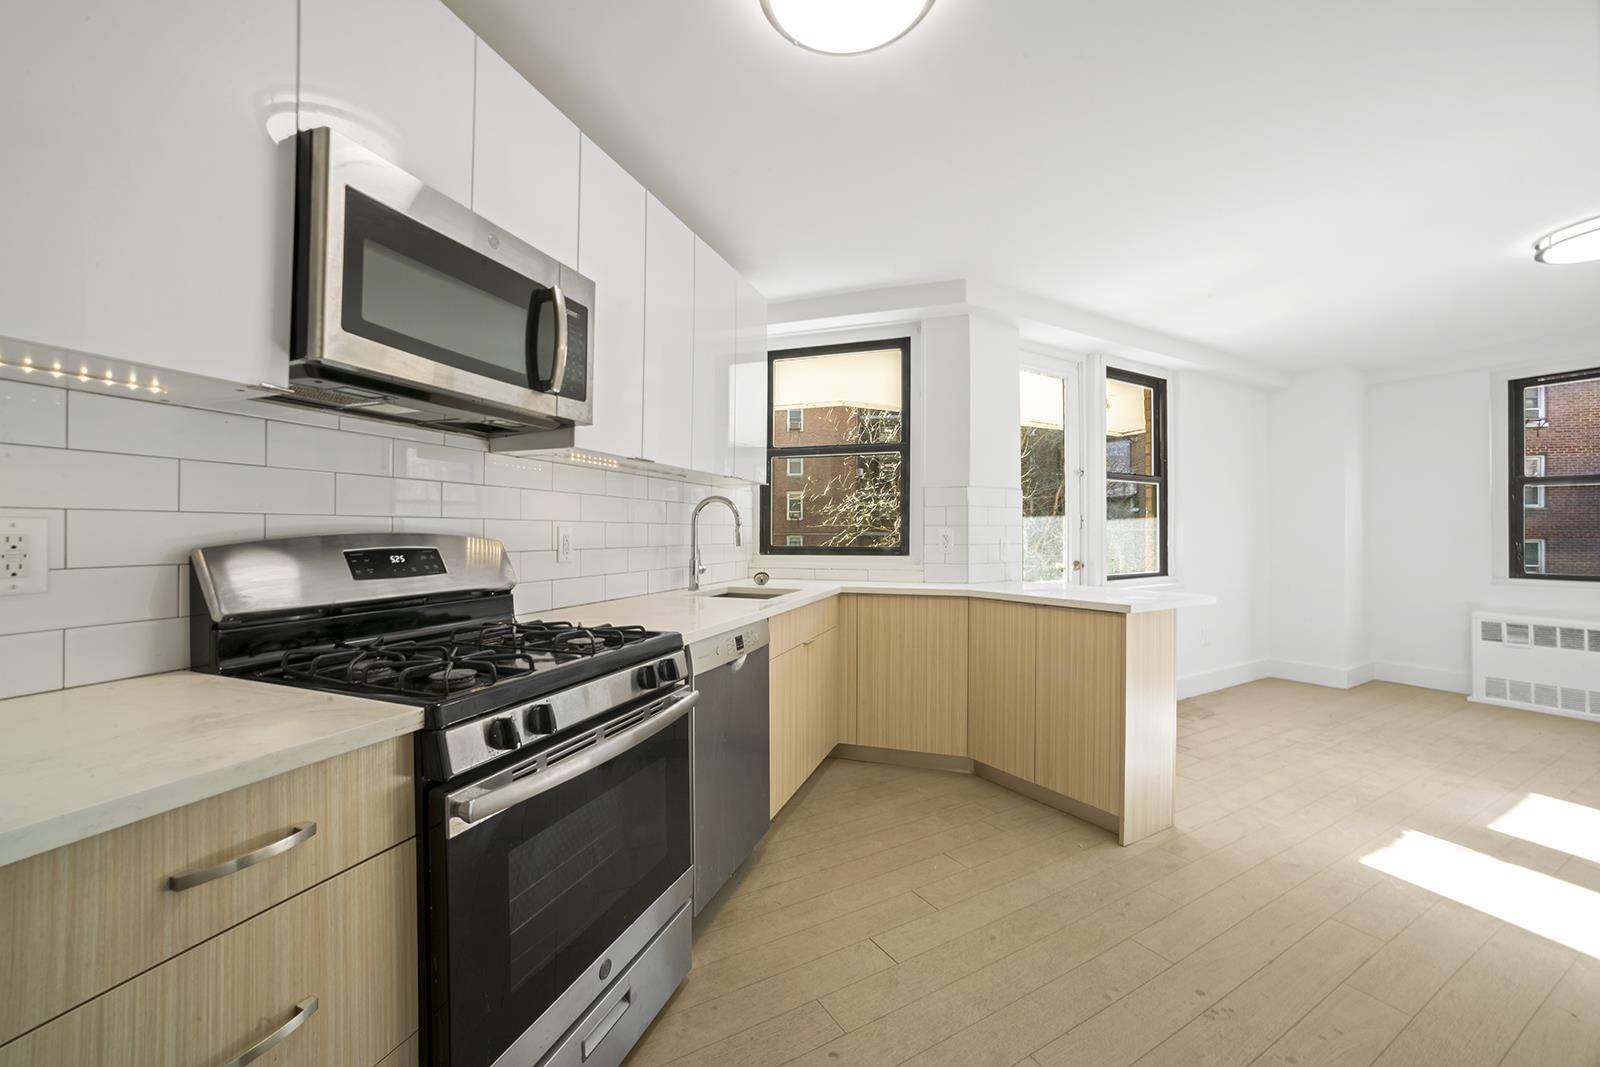 Welcome to The Drake, where luxury living meets modern convenience in the heart of Rego Park.